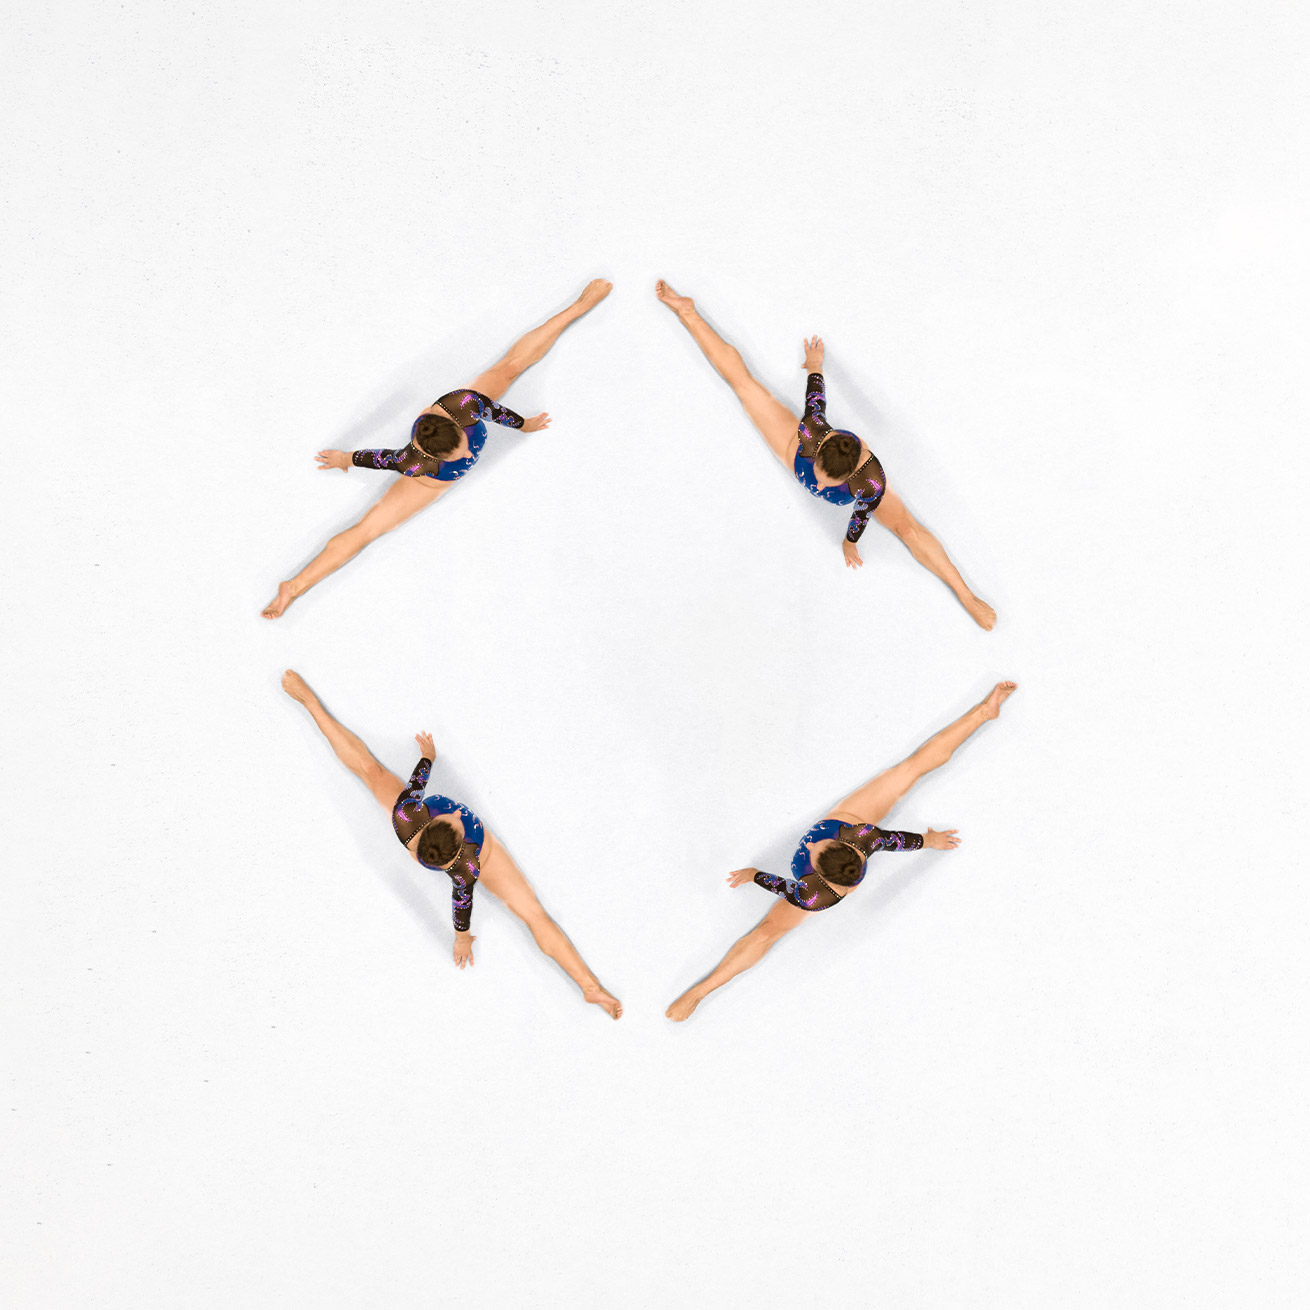 Aerial shot of four gymnasts in a diamond shape